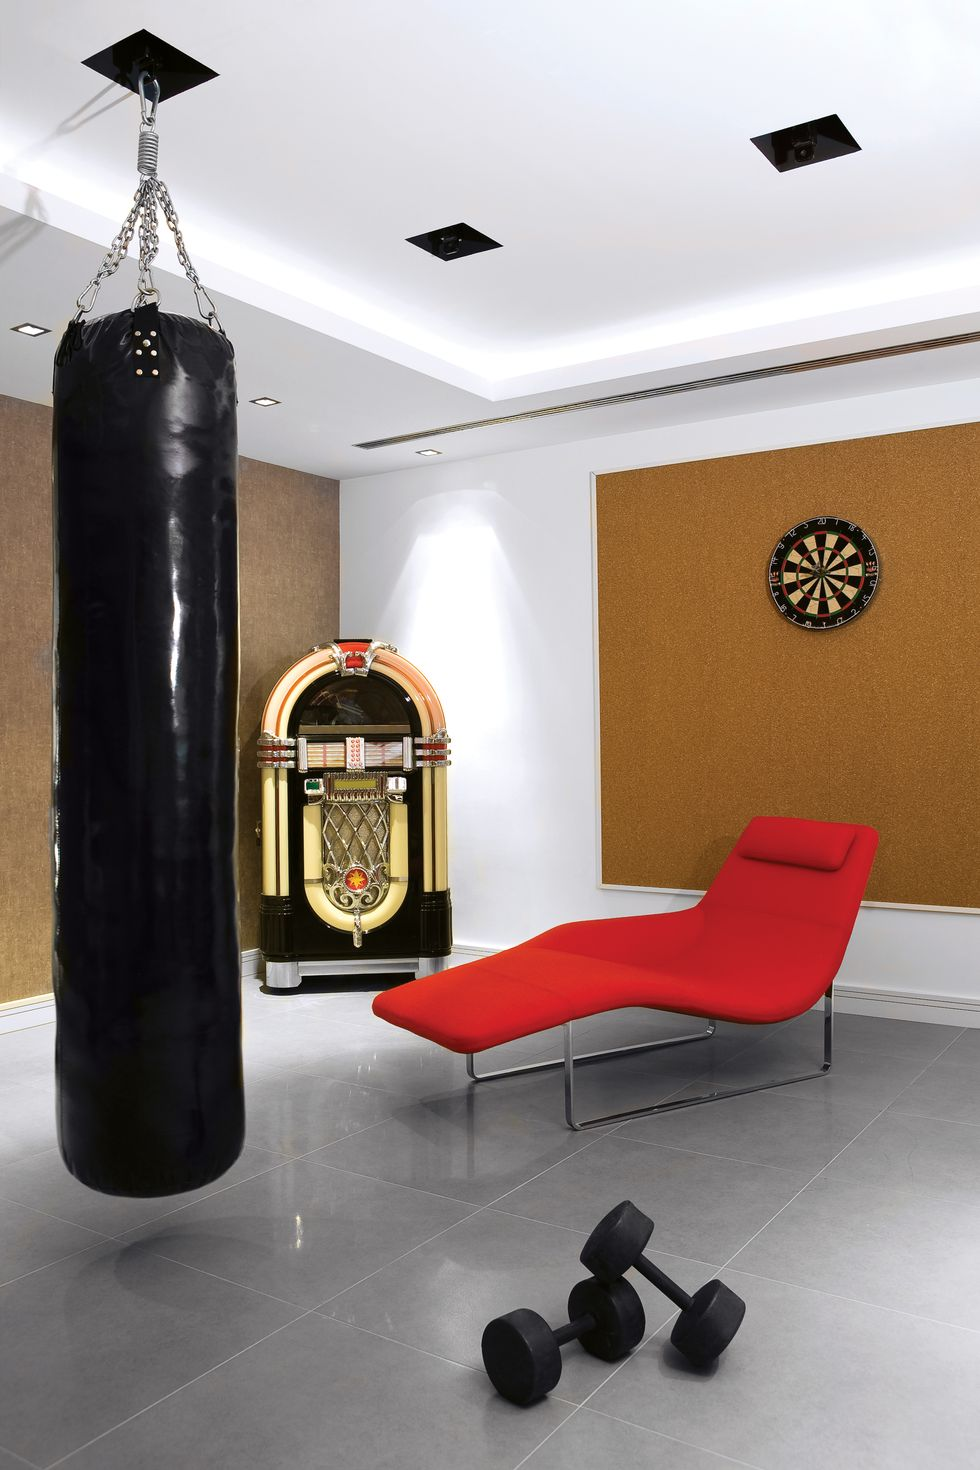 Clever Bonus Room Ideas You Have to See - Clever Bonus Room Ideas You Have to See -   18 fitness Room lounge ideas